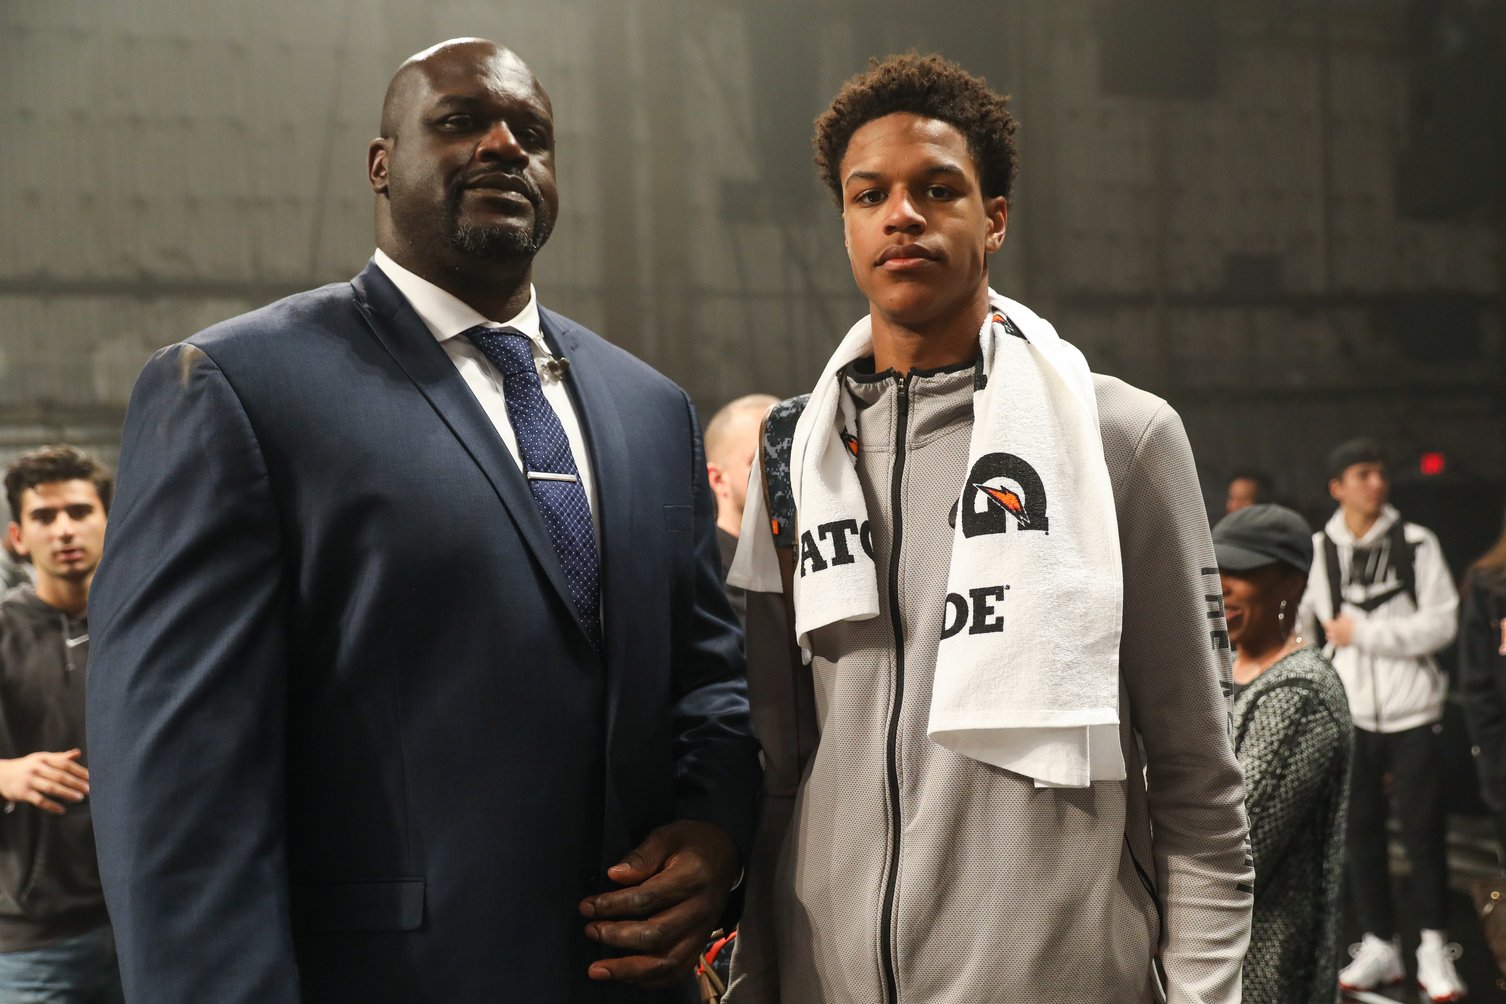 Shaquille O'Neal and eldest son, Shareef O'Neal at the Jordan Brand Future of Flight Showcase in January 2018. | Photo: Getty Images